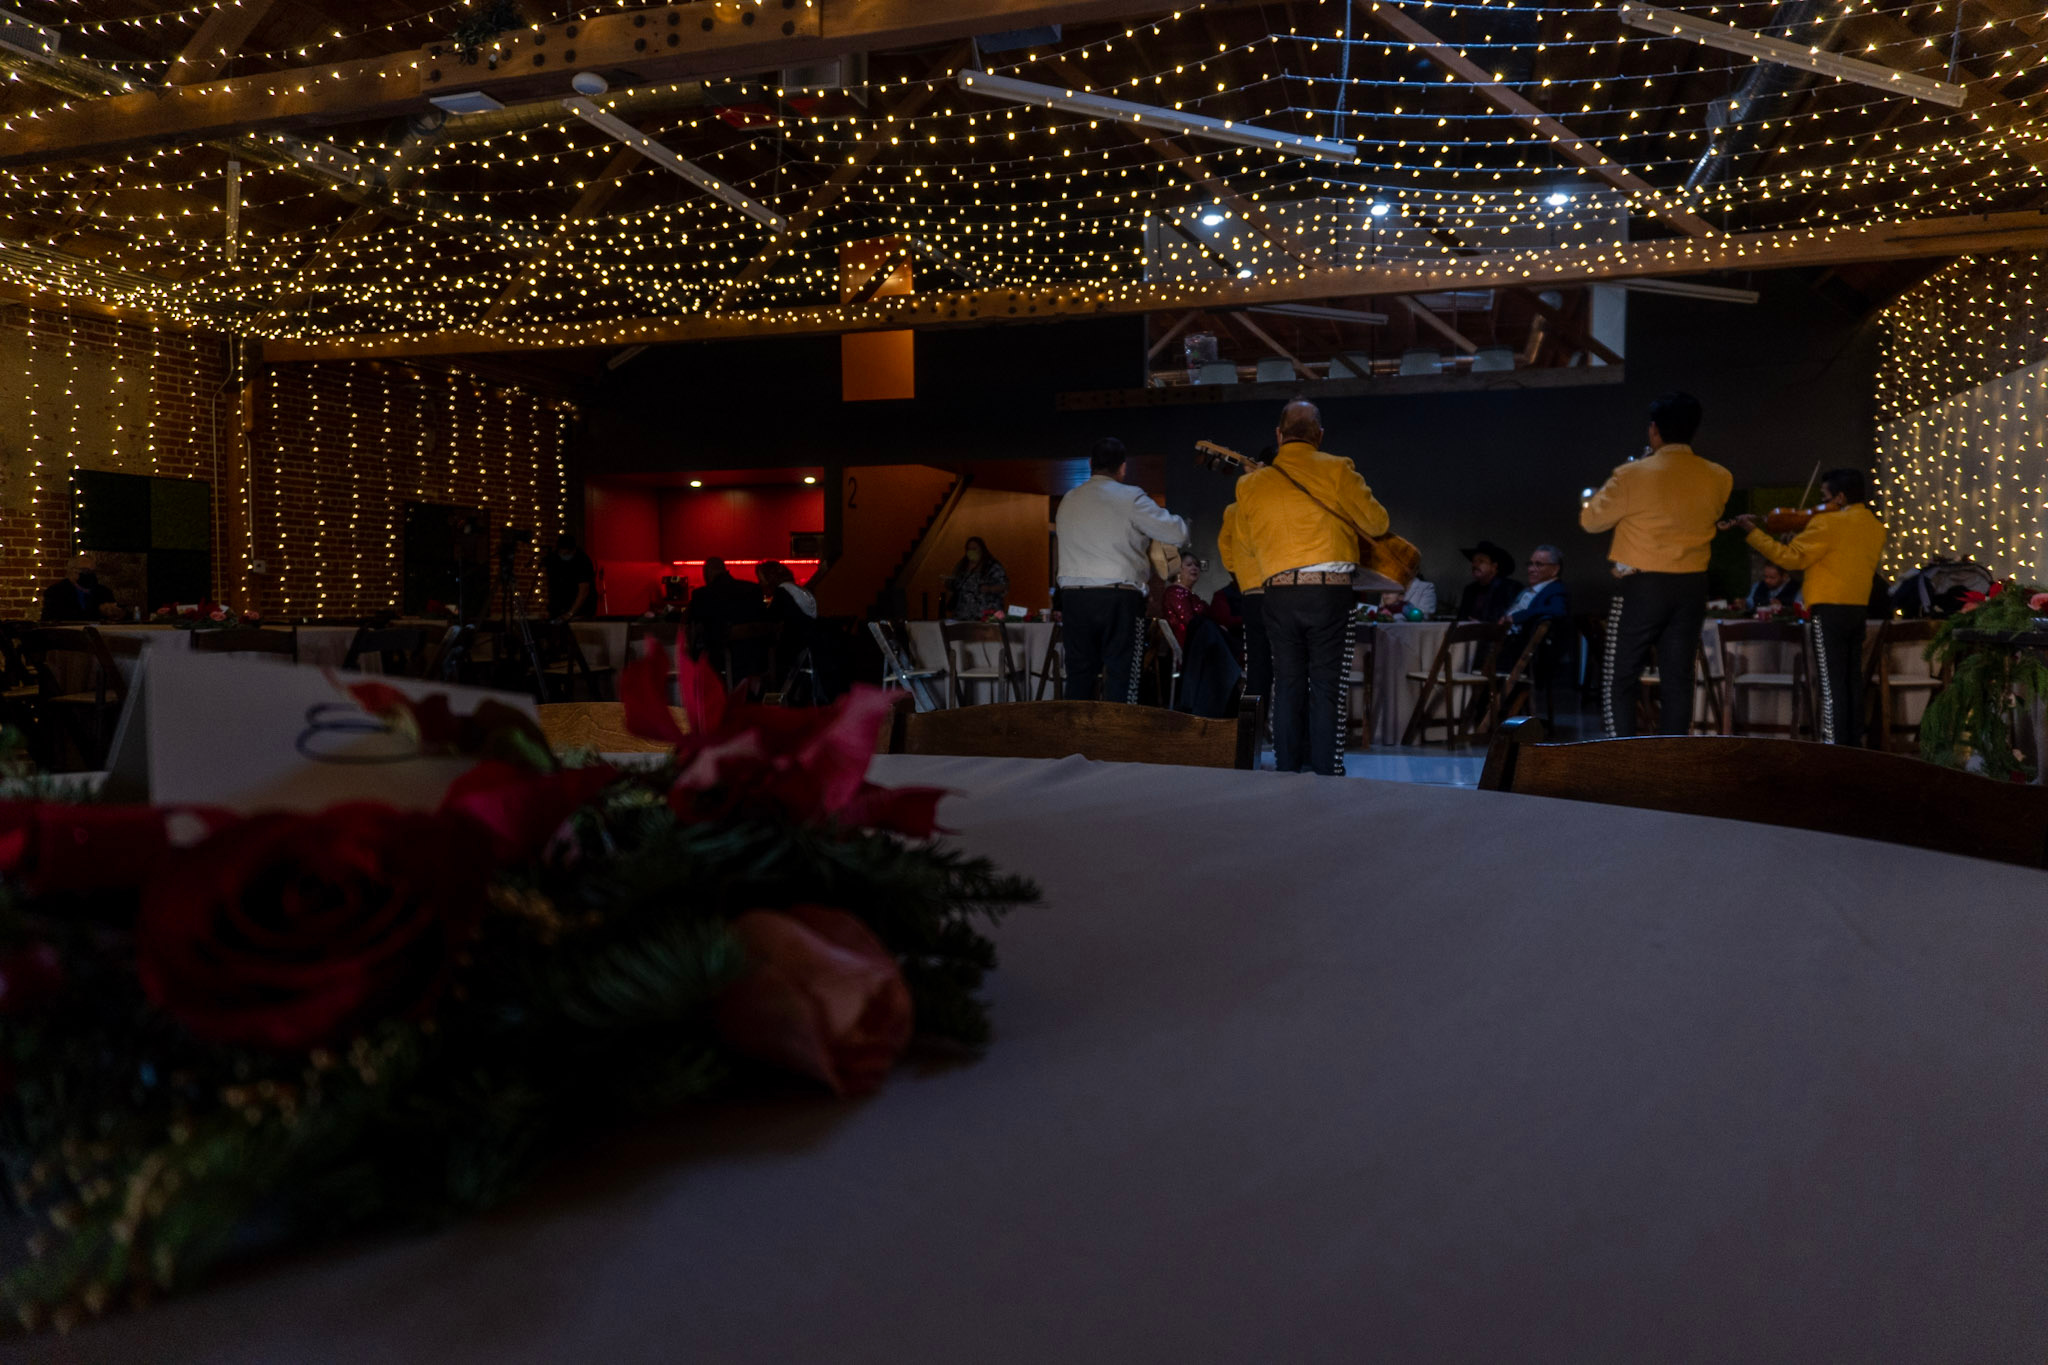 MG Studio Wedding Event Space Downtown Los Angeles Renovated Warehouse Exposed Brick Wood Beams Concrete Modern Industrial Chic - Live Band Twinkle Light Tent